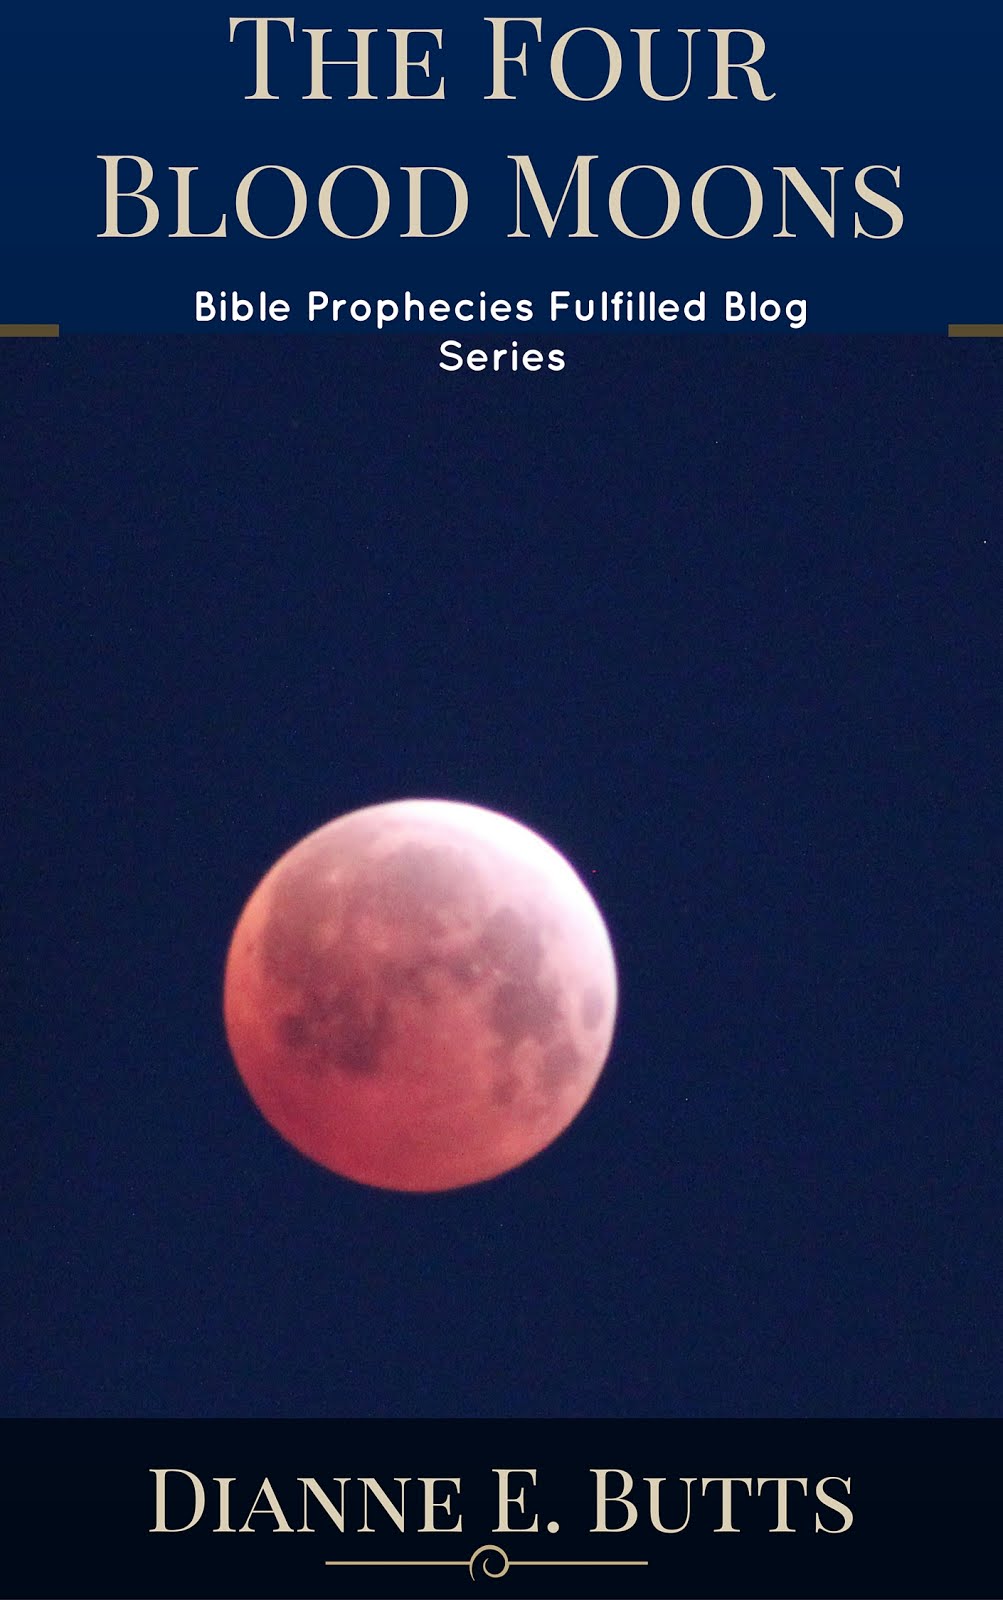 NEW!  The Four Blood Moons: What They Are, What They Mean, and Why They’re Important in Light of Bi